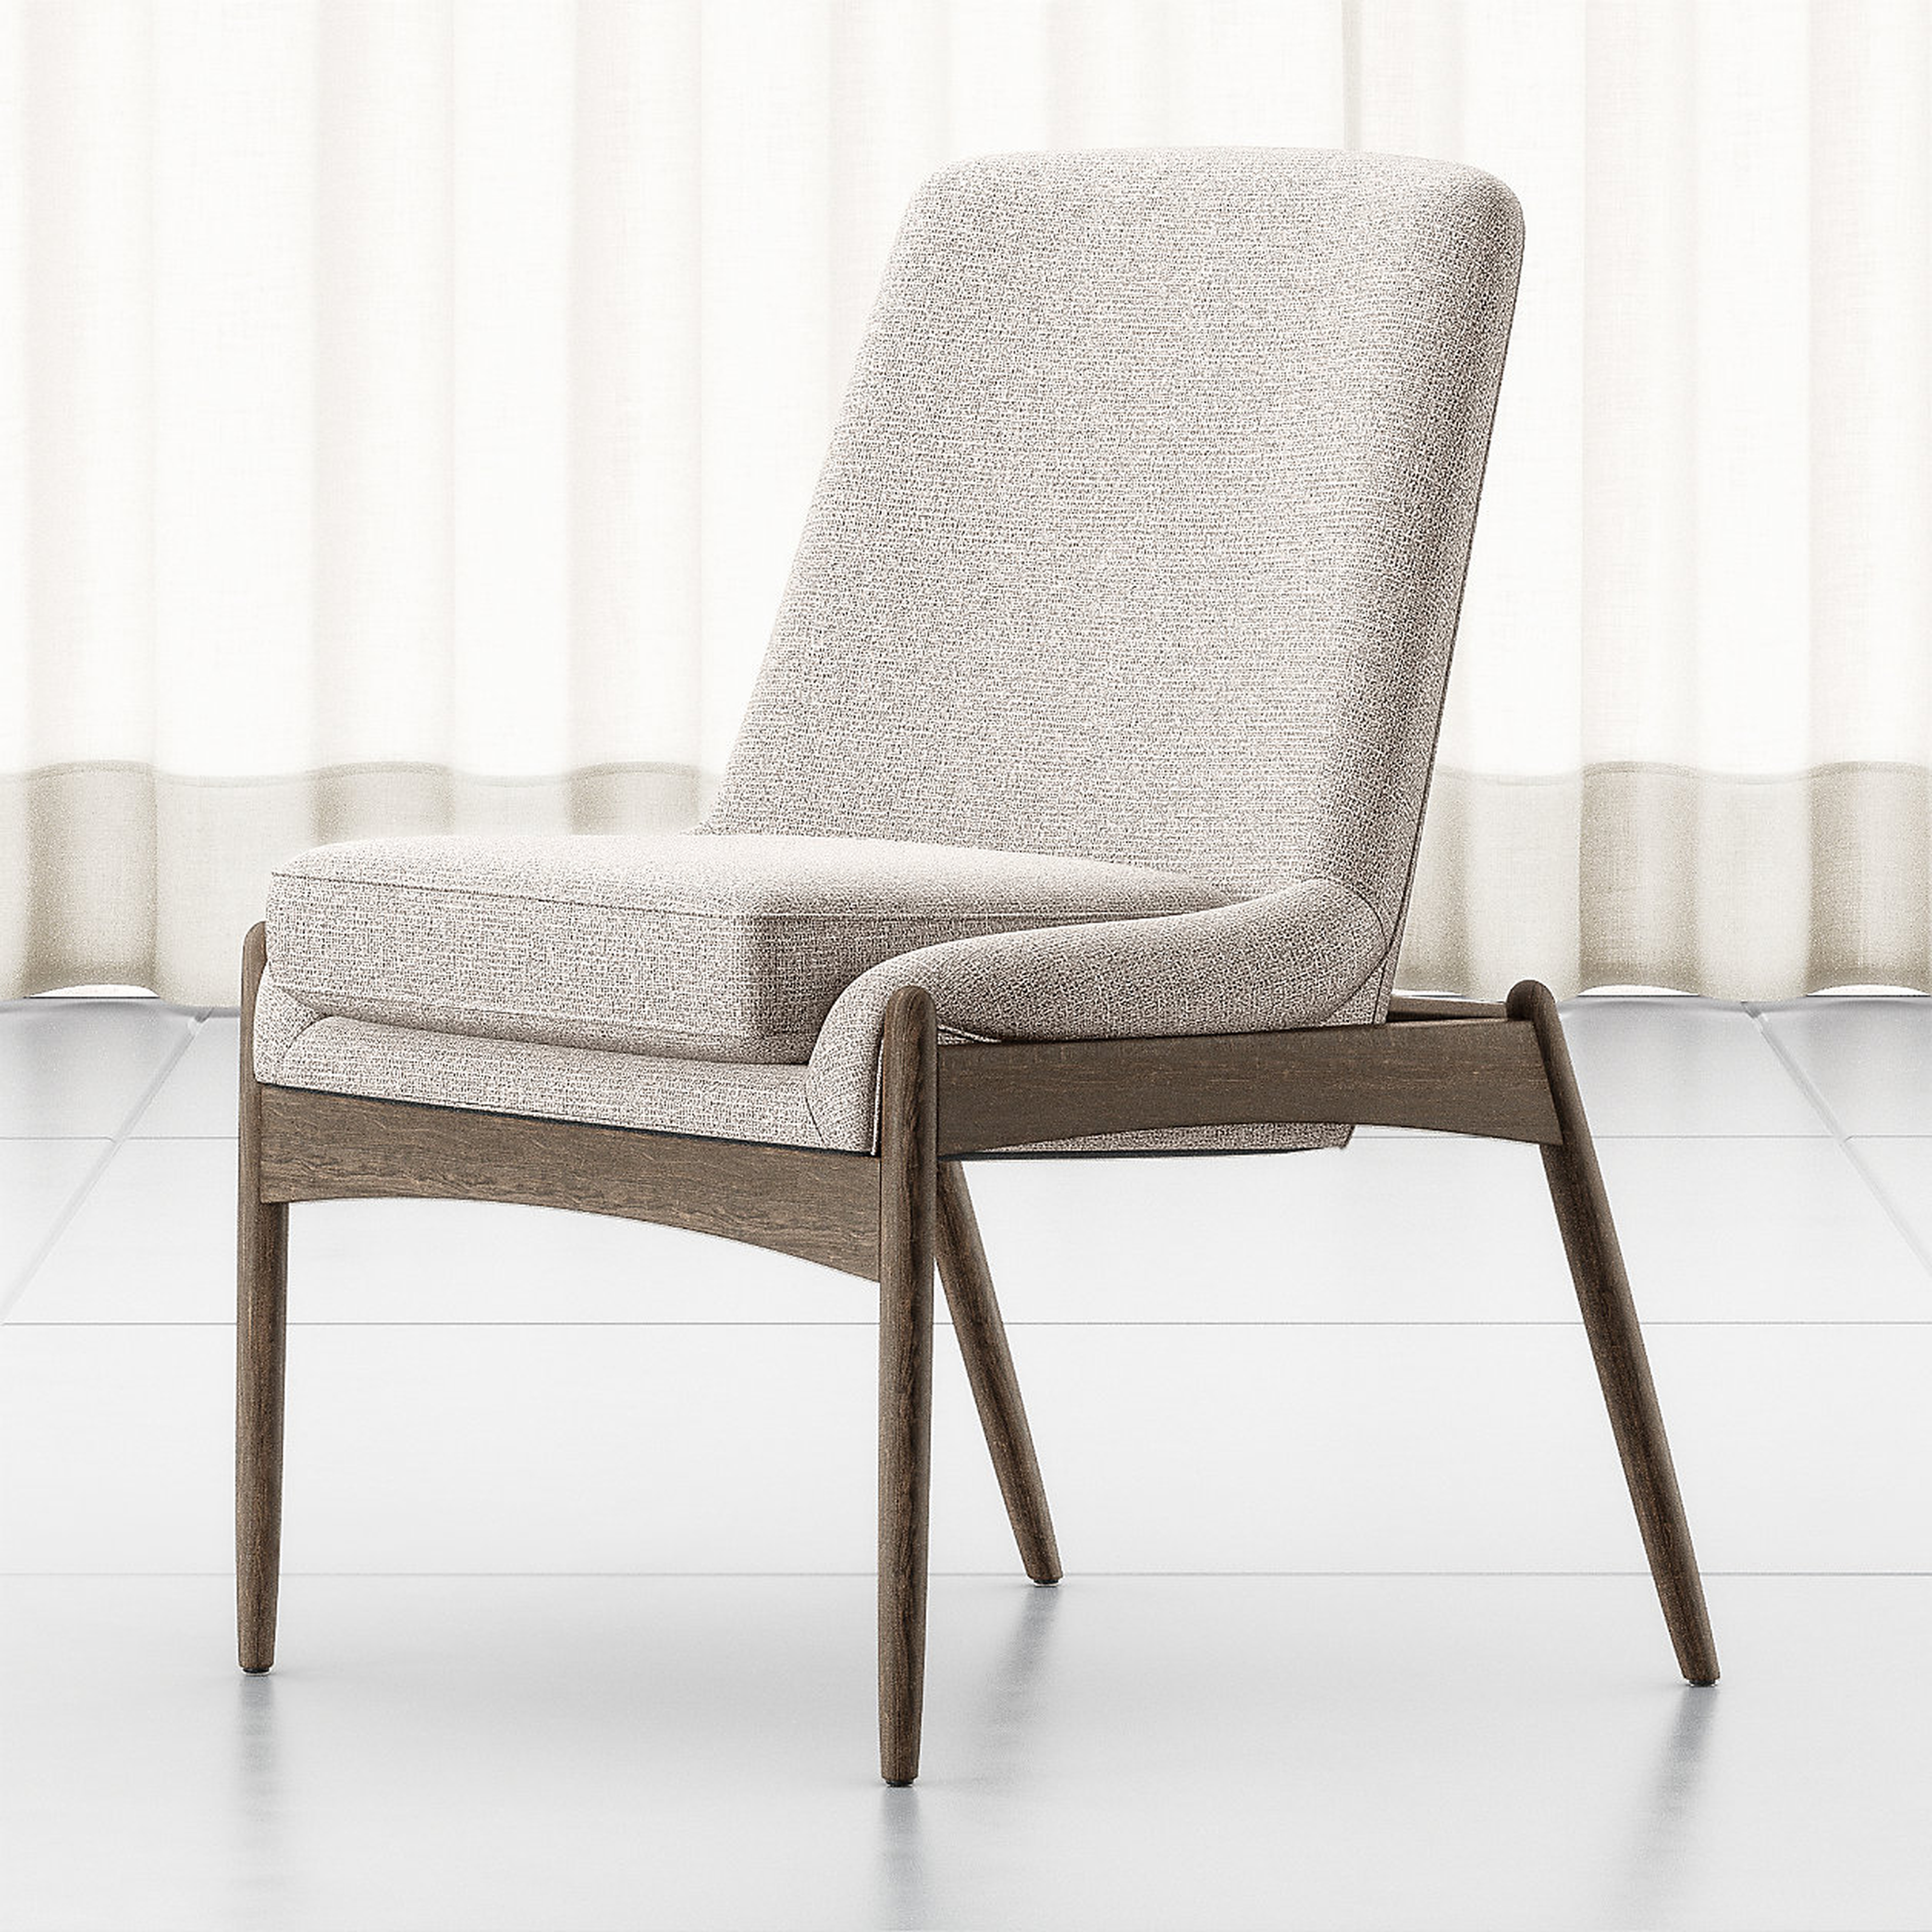 Ashton Midcentury Dining Chair - Crate and Barrel